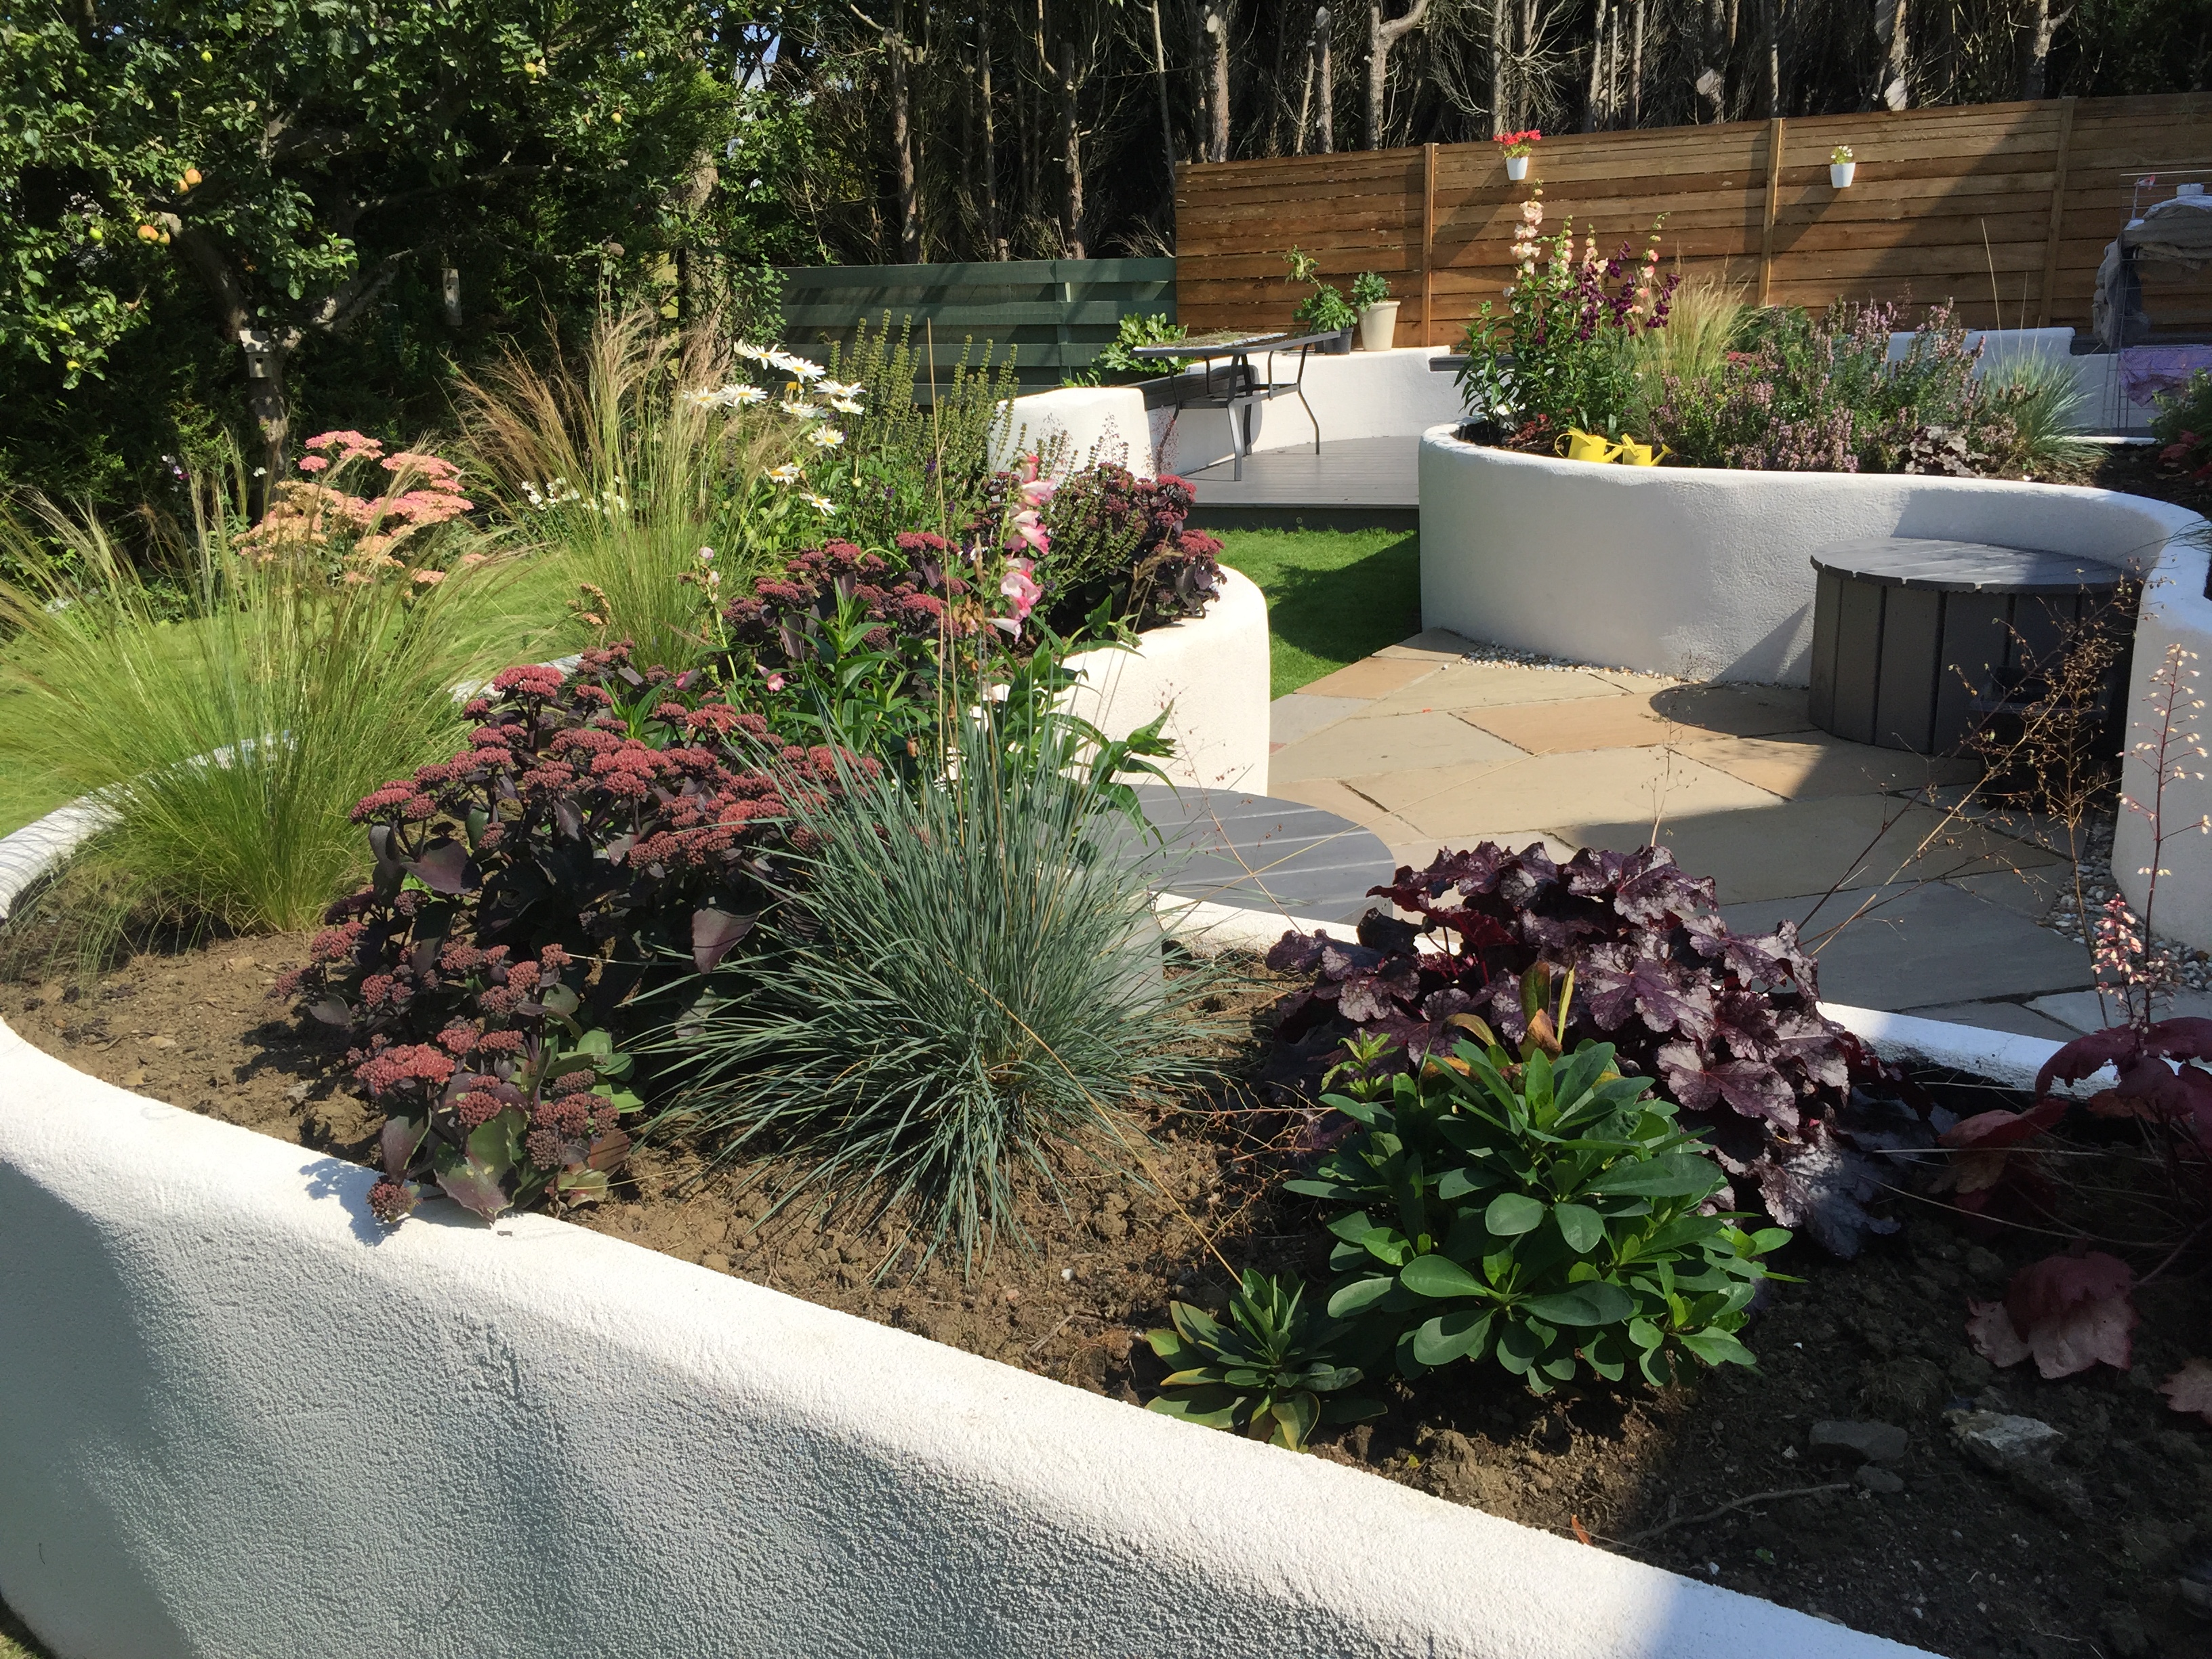 </p> <p>Find your ideal home design pro on designfor-me.com - get matched and see who's interested in your home project. Click image to see more inspiration from our design pros</p> <p>Design by Tim, garden designer from Midlothian</p> <p> #gardendesign #gardeninspiration #gardenlove #gardenideas #gardens </p> <p>